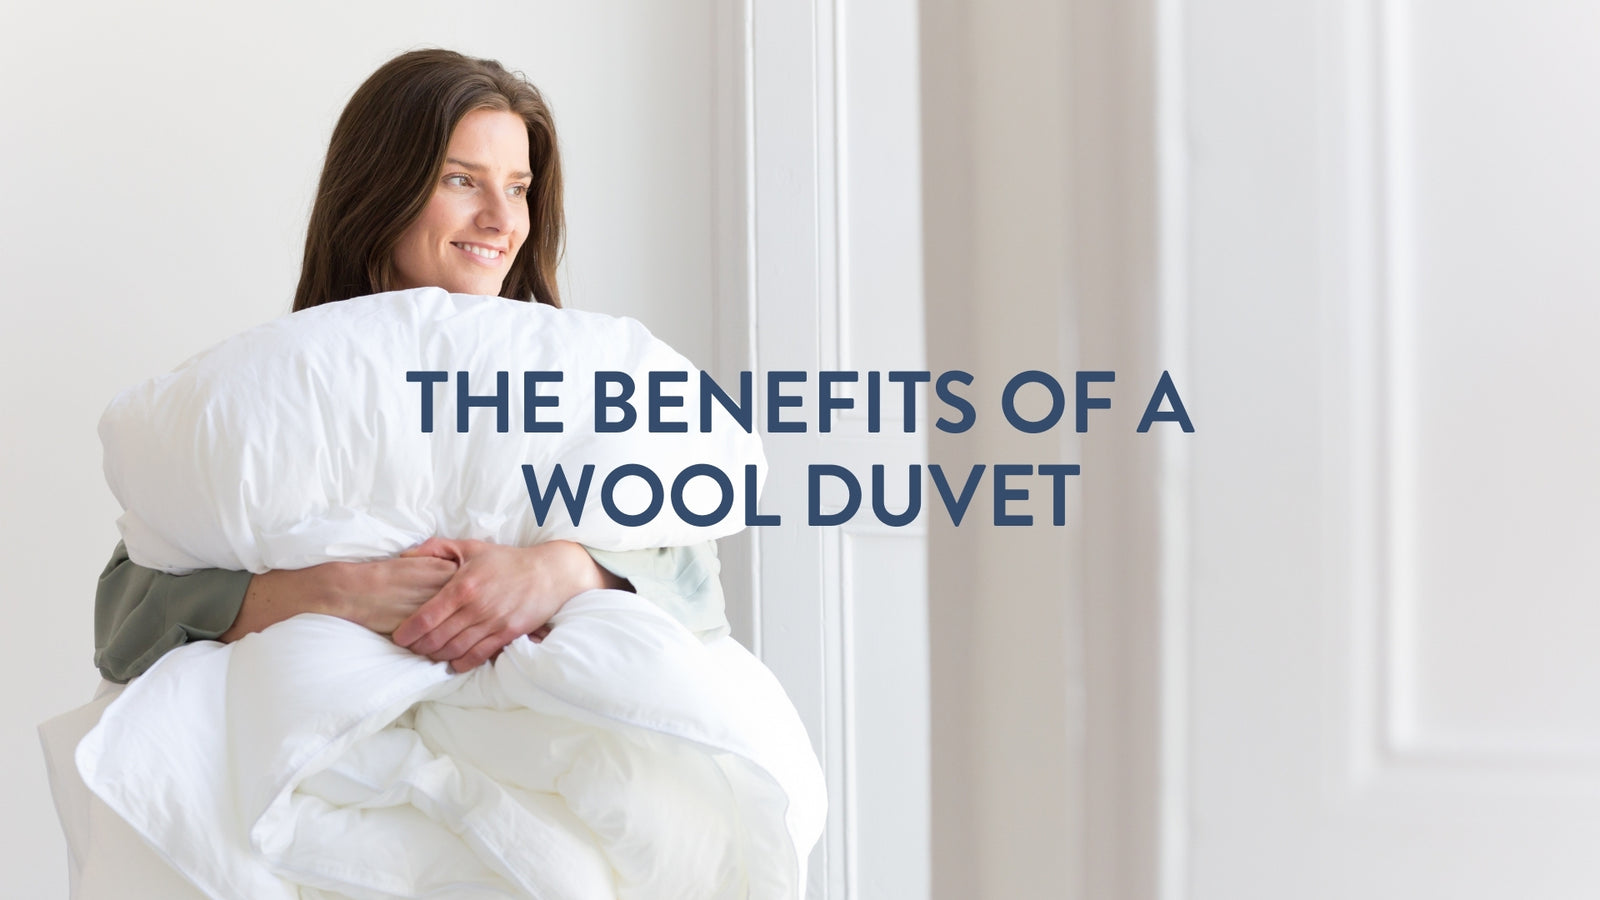 The benefits of a wood duvet, why use one heat cool, natural.